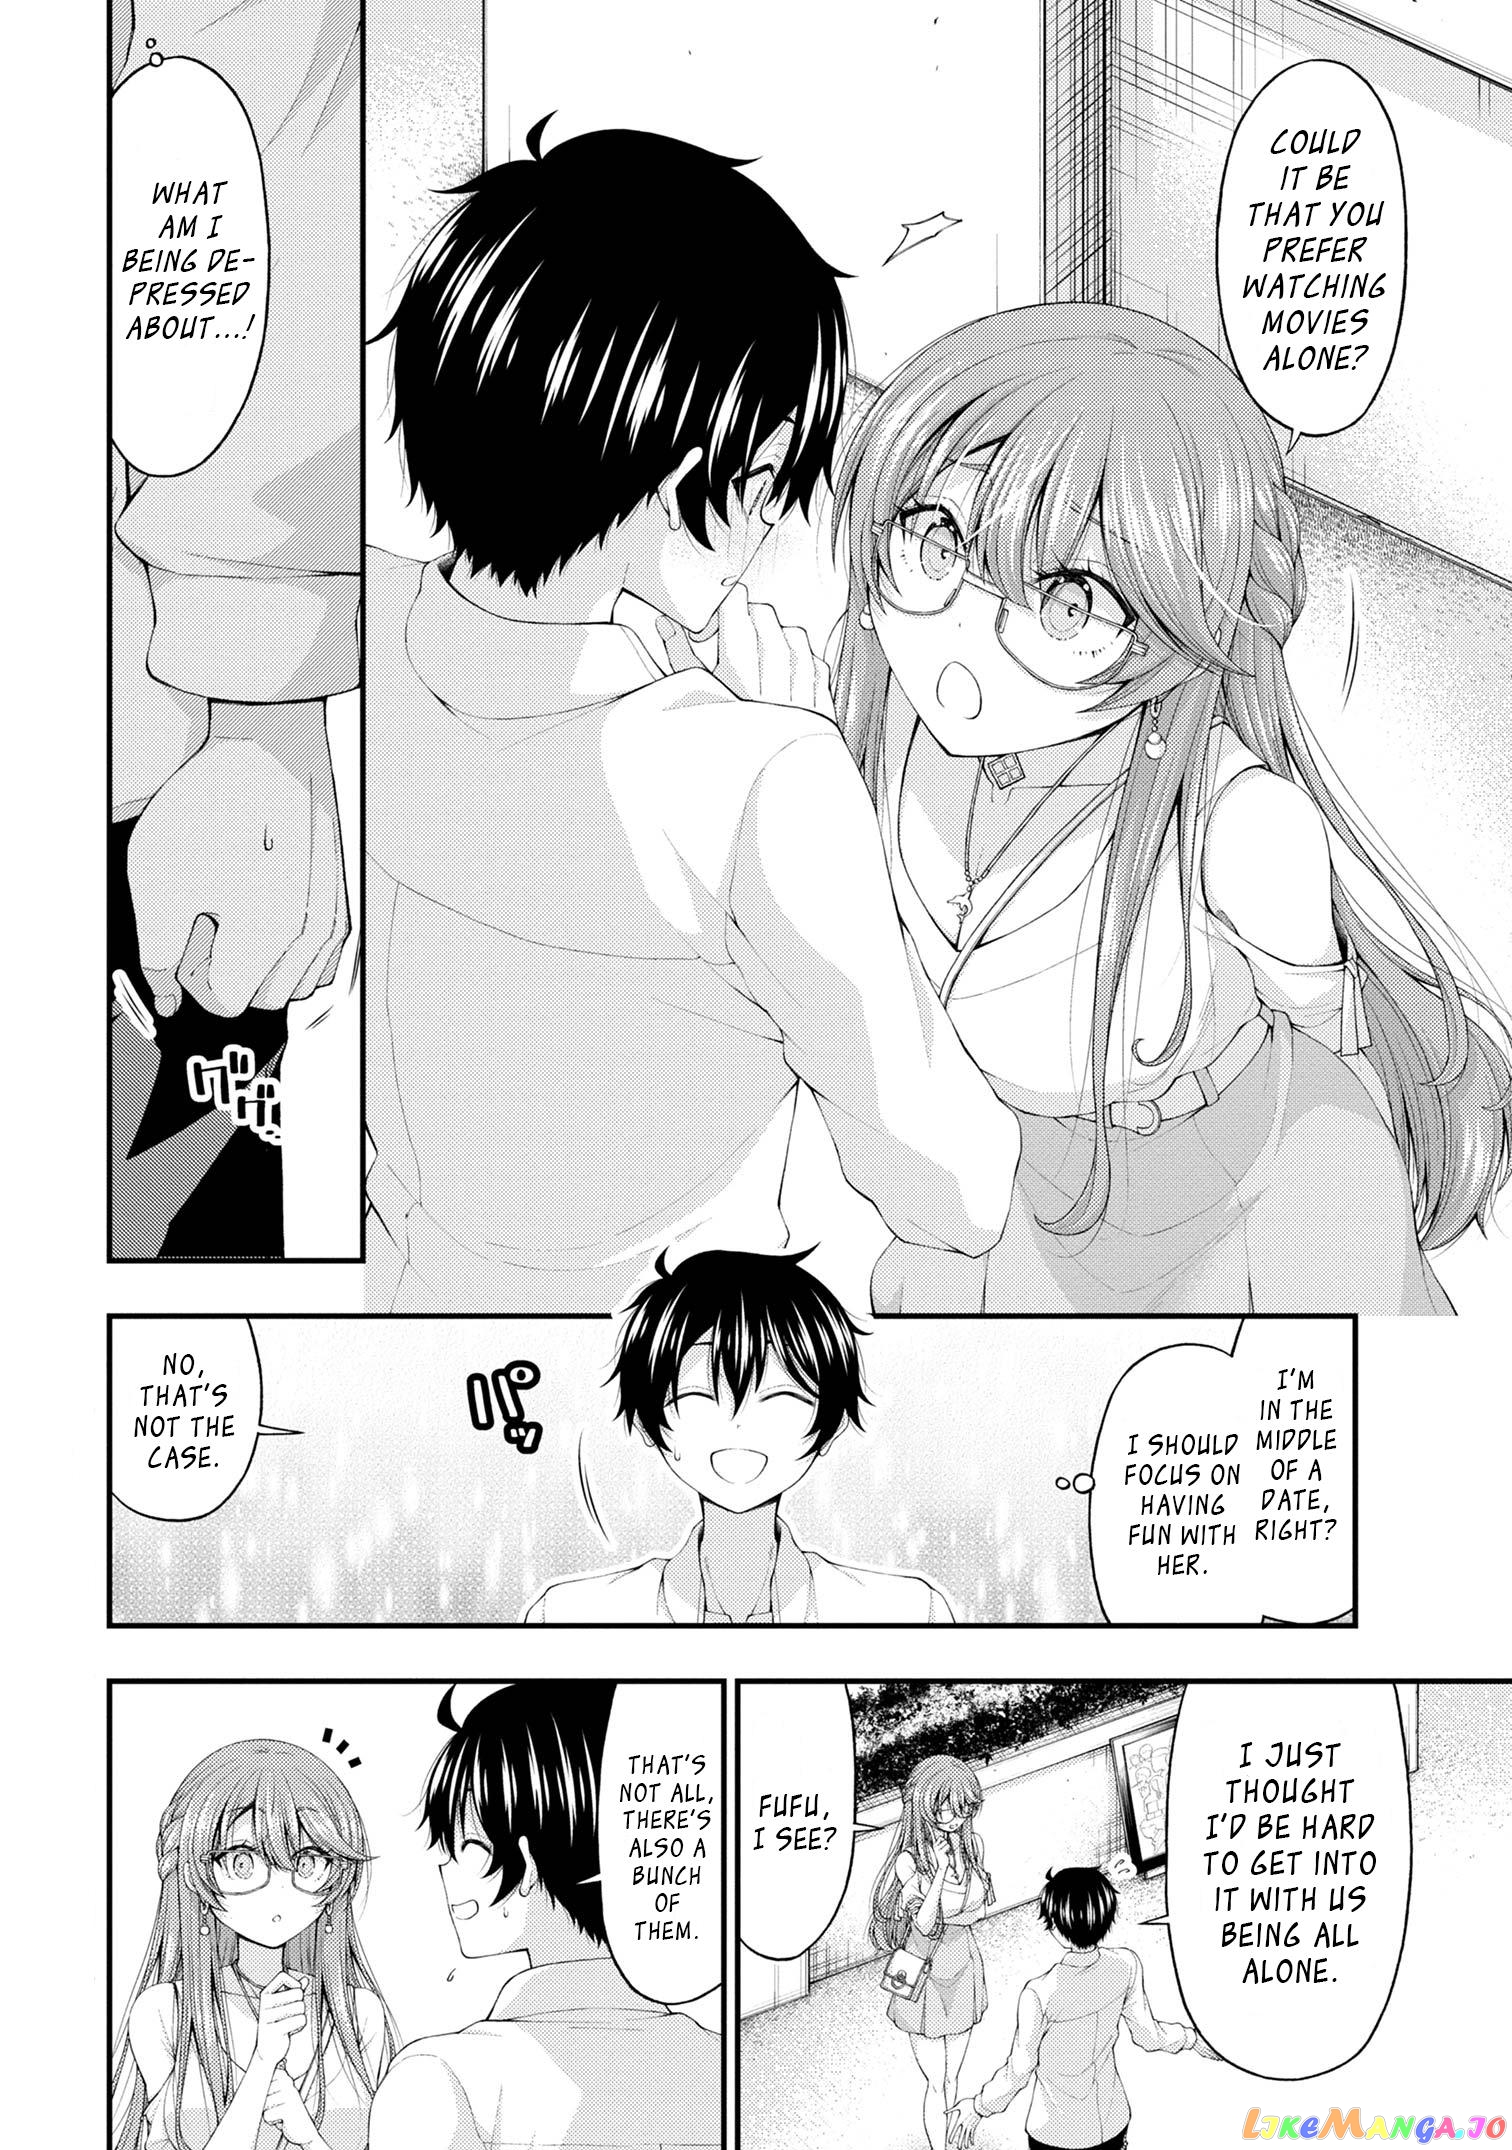 The Gal Who Was Meant to Confess to Me as a Game Punishment Has Apparently Fallen in Love with Me chapter 10 - page 6